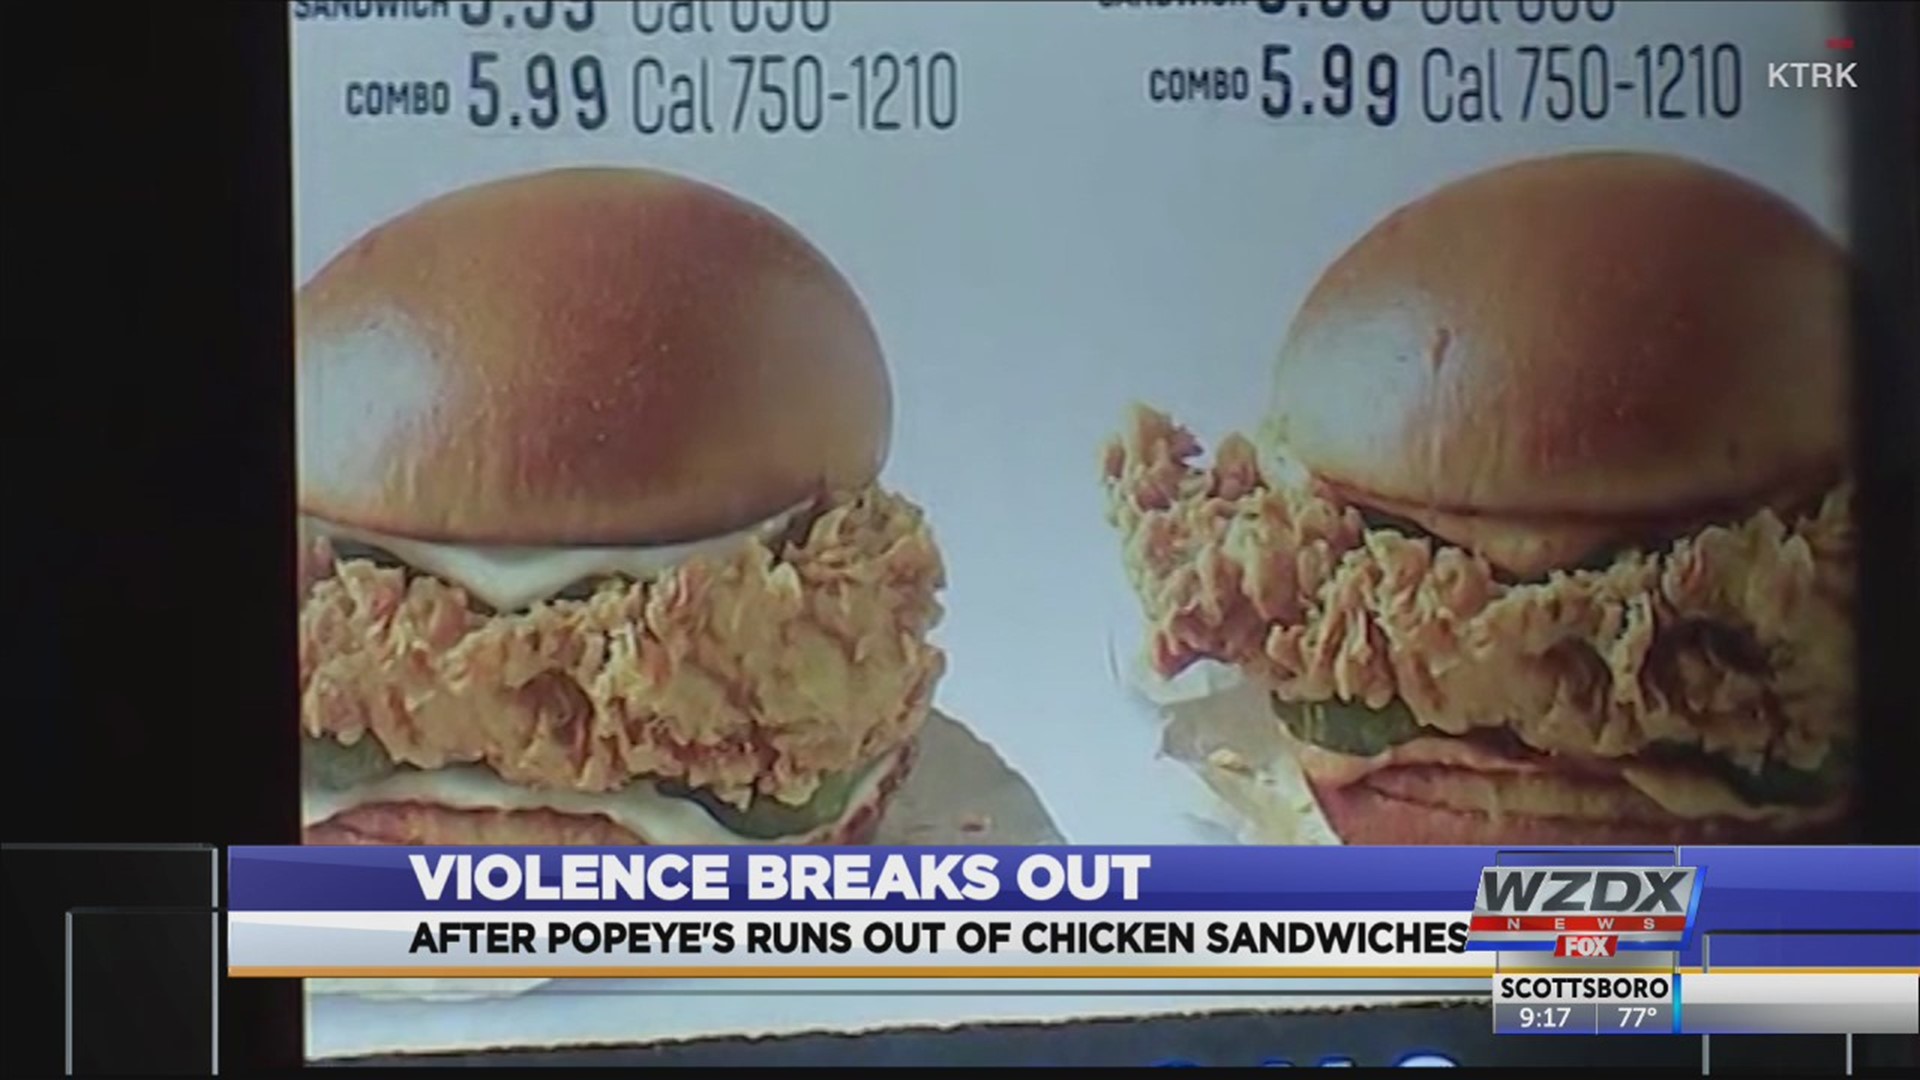 Some Popeye's fans went nuts when they learned the restaurant was sold out of chicken sandwiches.